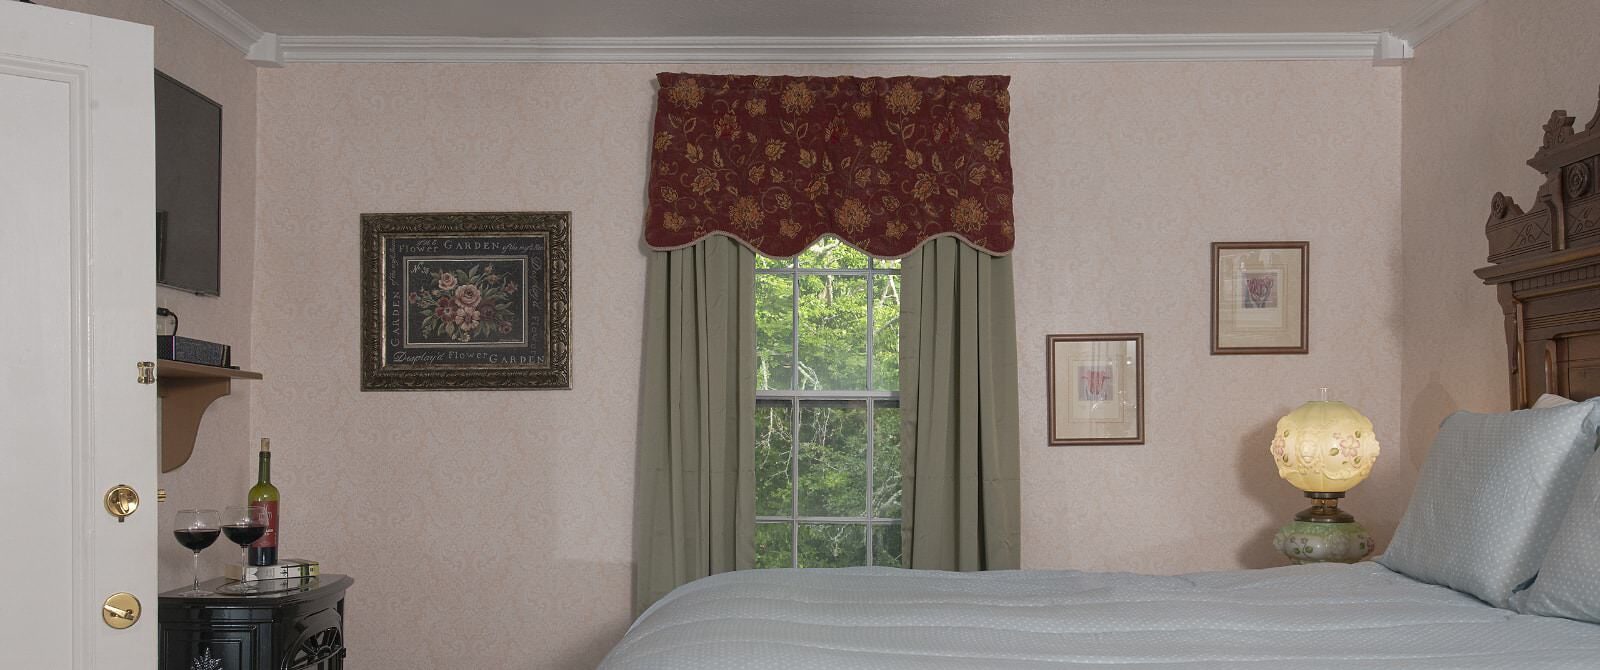 Bedroom with light pink brocade wallpaper, antique wooden headboard, light blue bedding, and window with a view of green trees